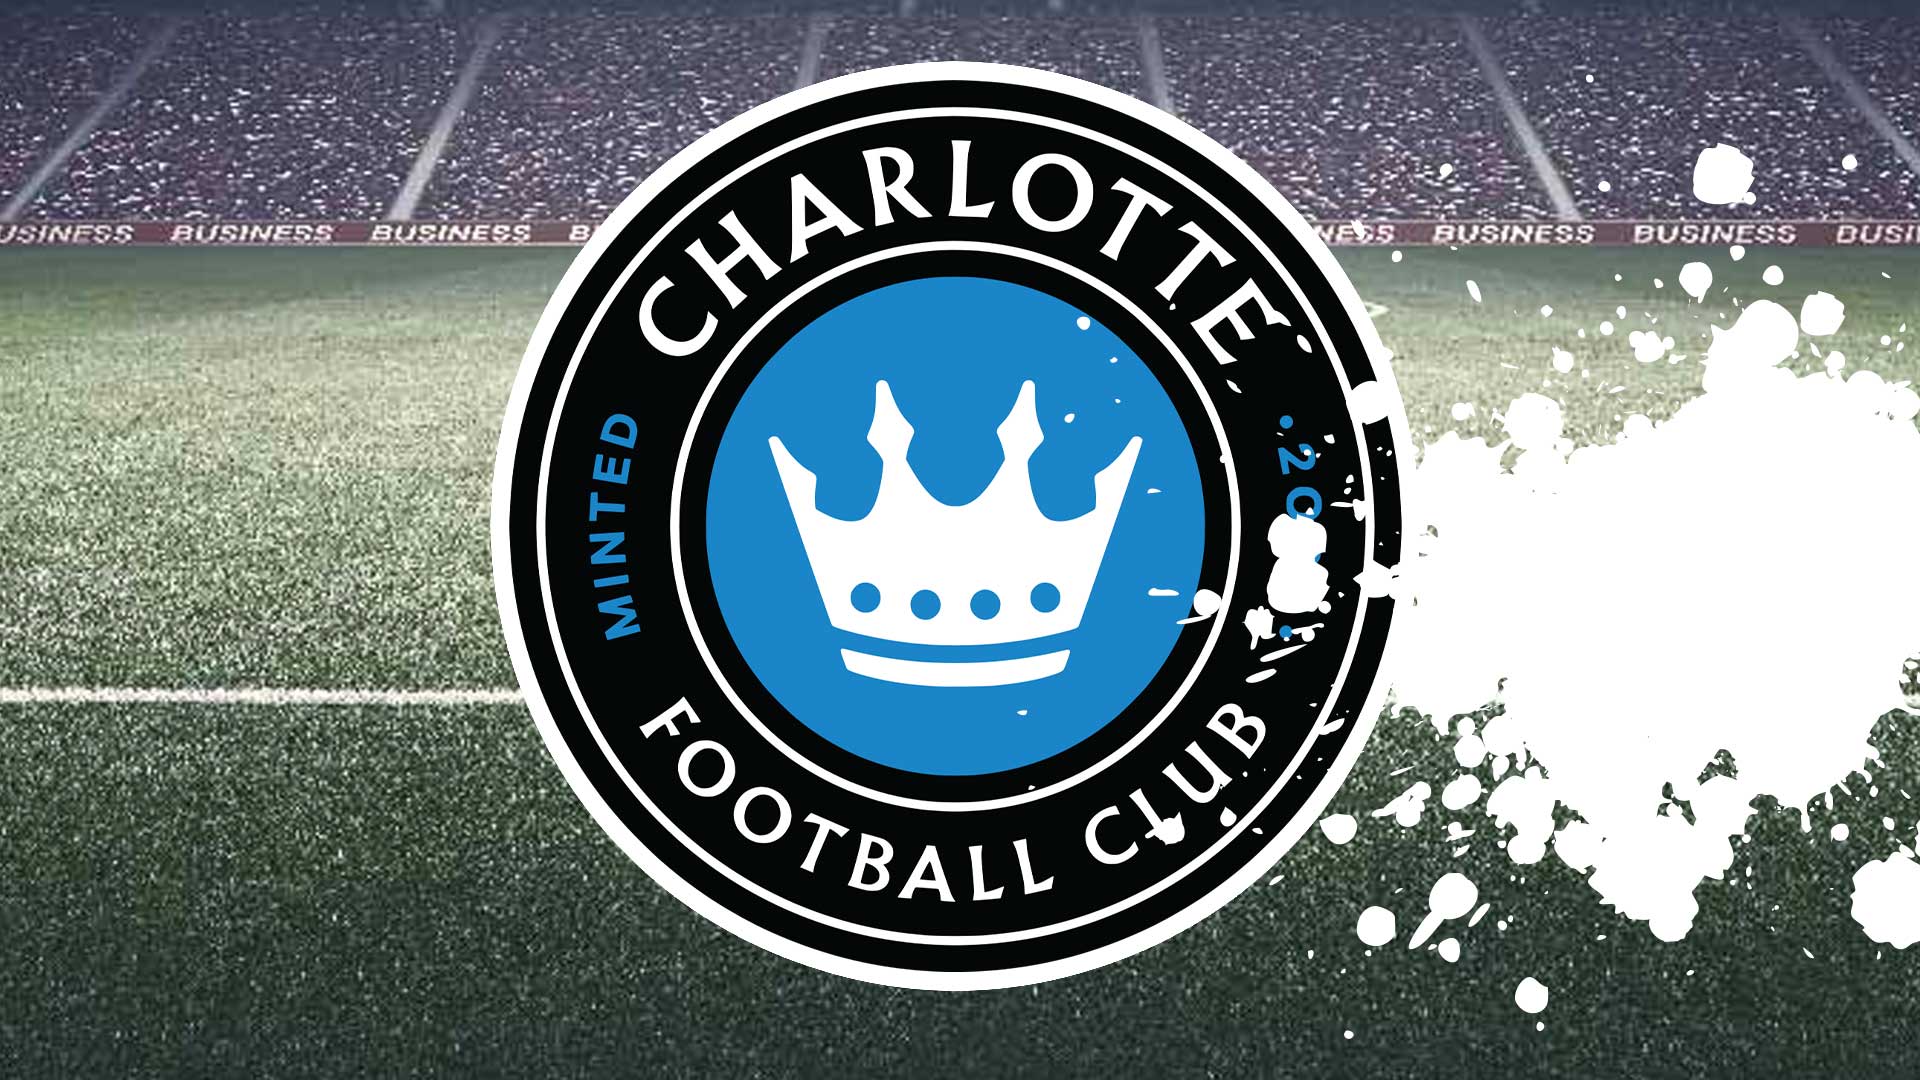 Charlotte FC badge obscured by a white splat